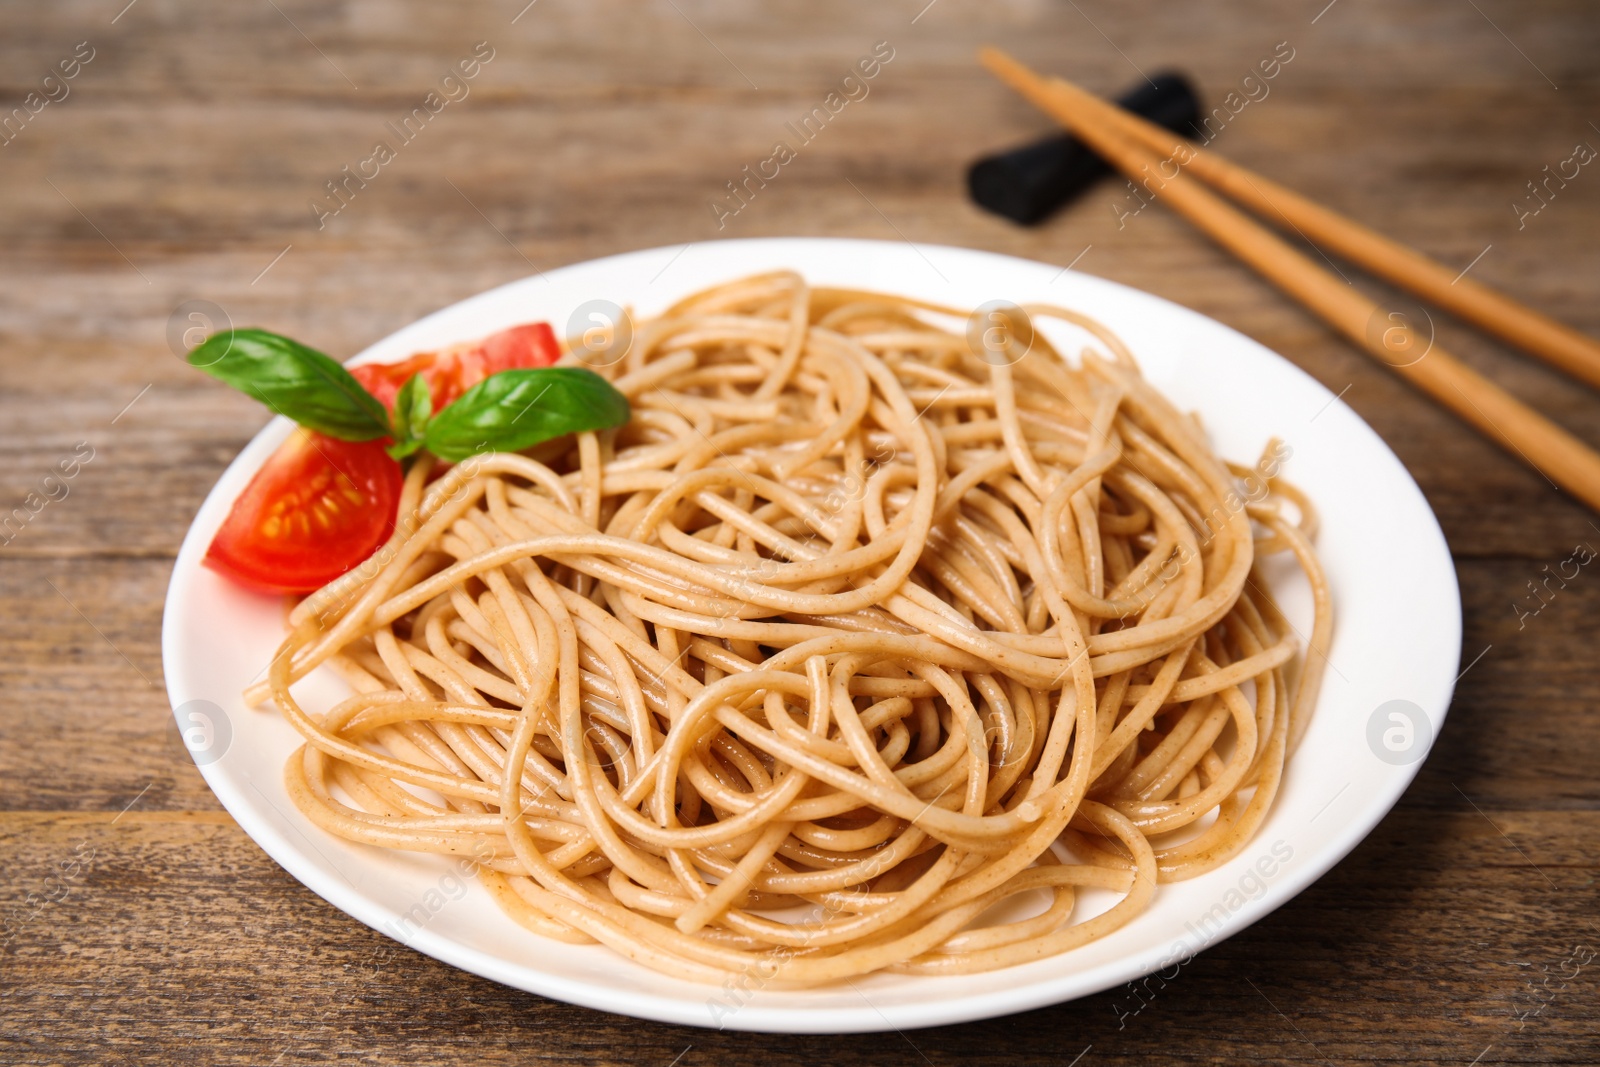 Photo of Tasty buckwheat noodles served on wooden table